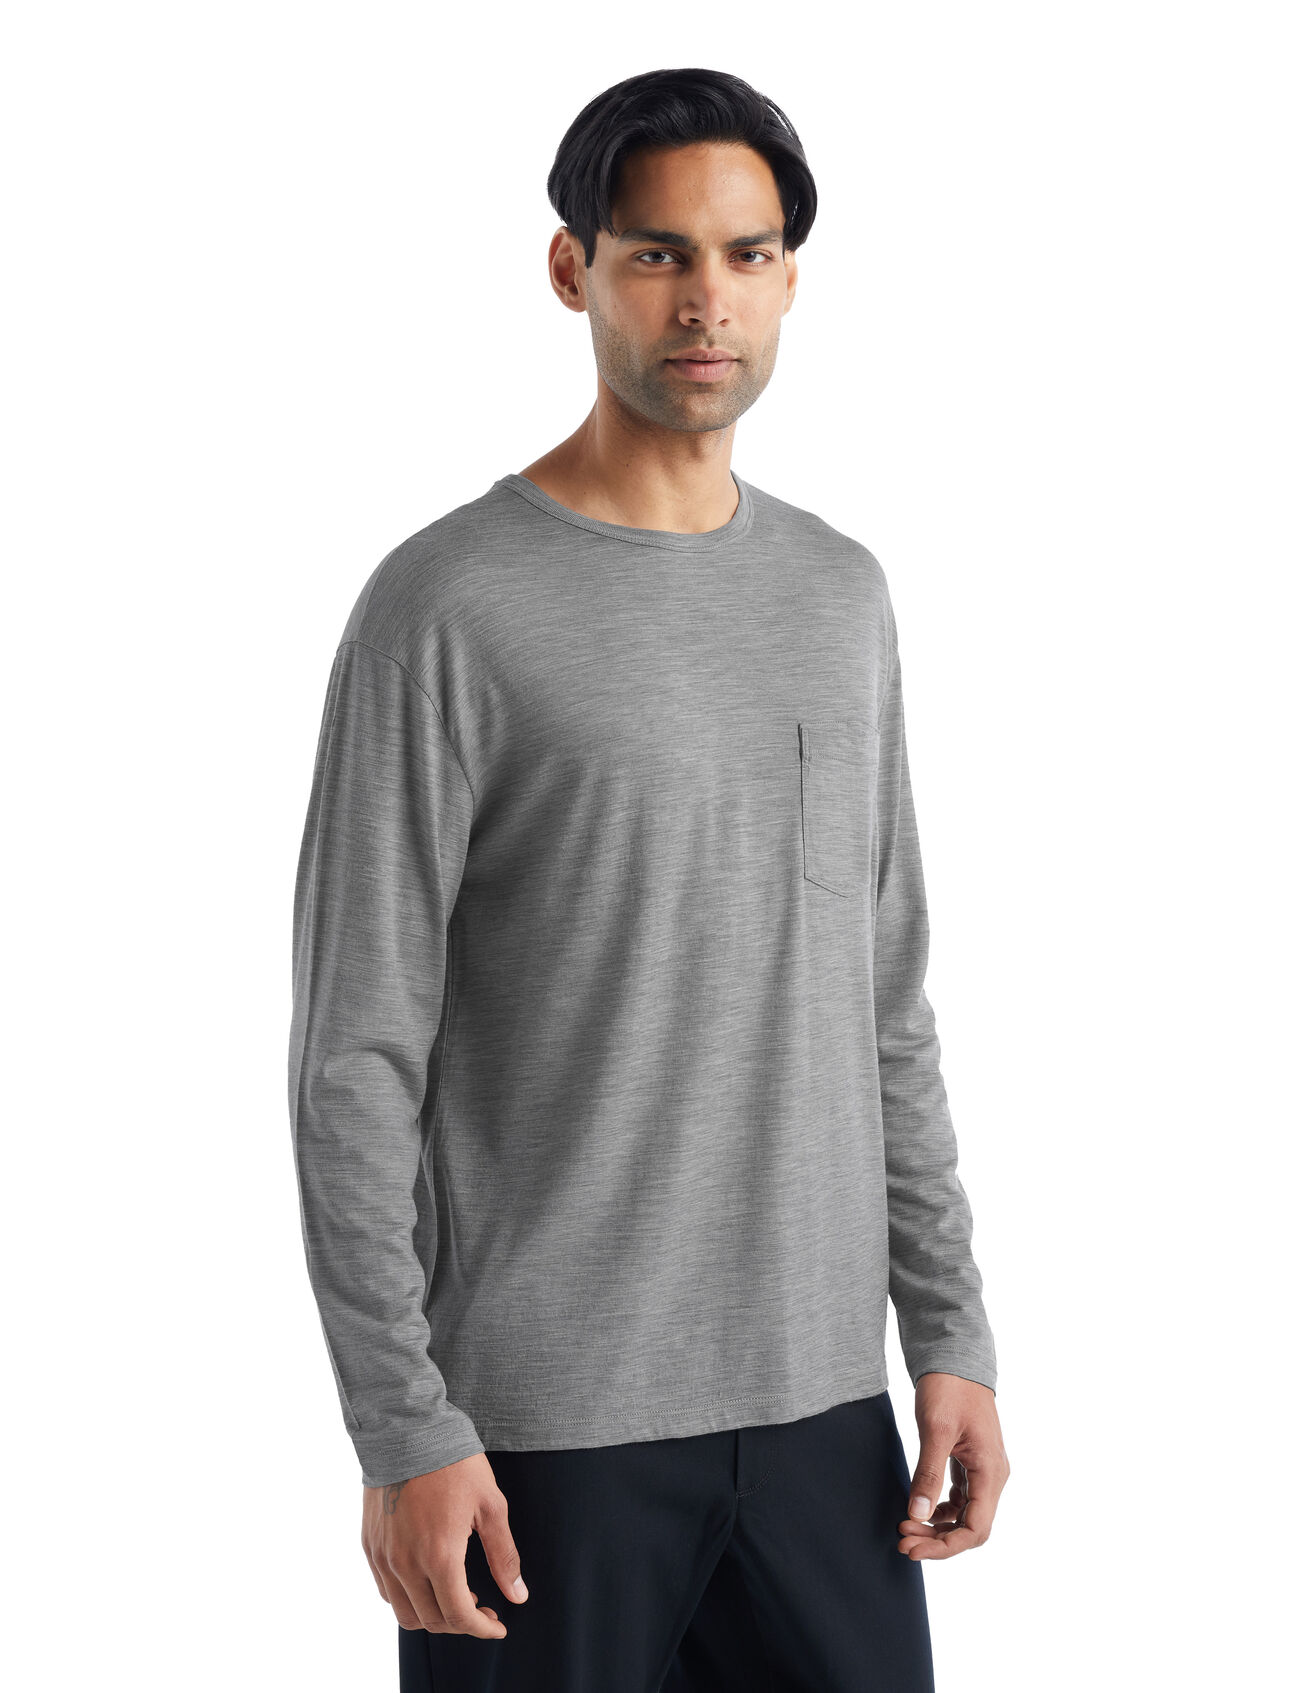 Mens Merino Granary Long Sleeve Pocket T-Shirt A classic pocket tee with a relaxed fit and soft, breathable, 100% merino wool fabric, the Granary Long Sleeve Pocket Tee is all about everyday comfort and style.